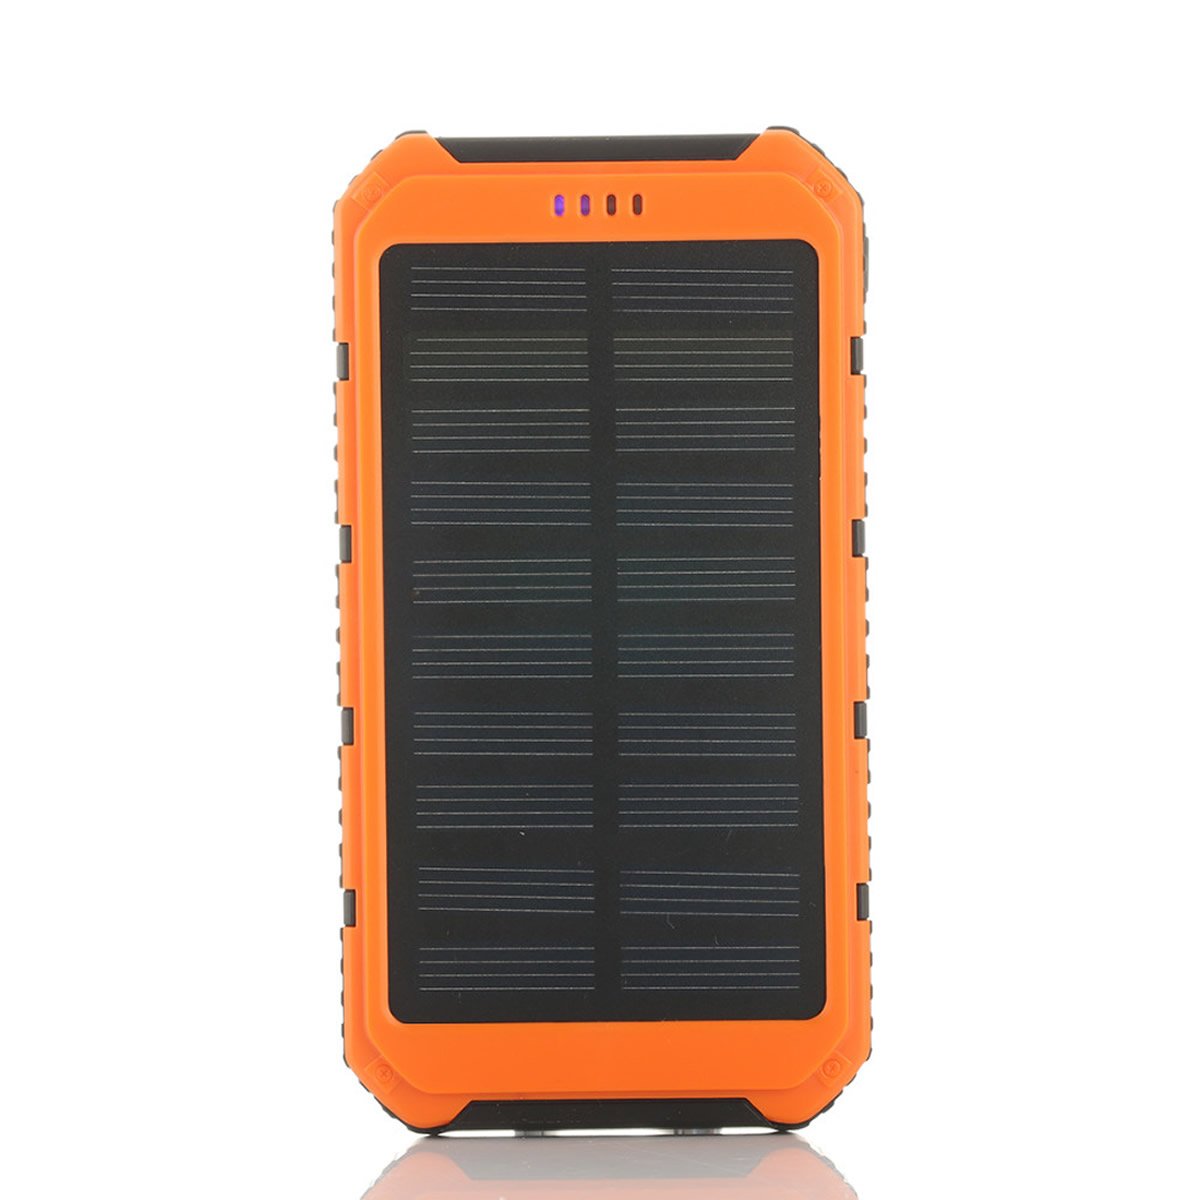 Roaming Solar Power Bank Phone or Tablet Charger. Available in 4 colors.